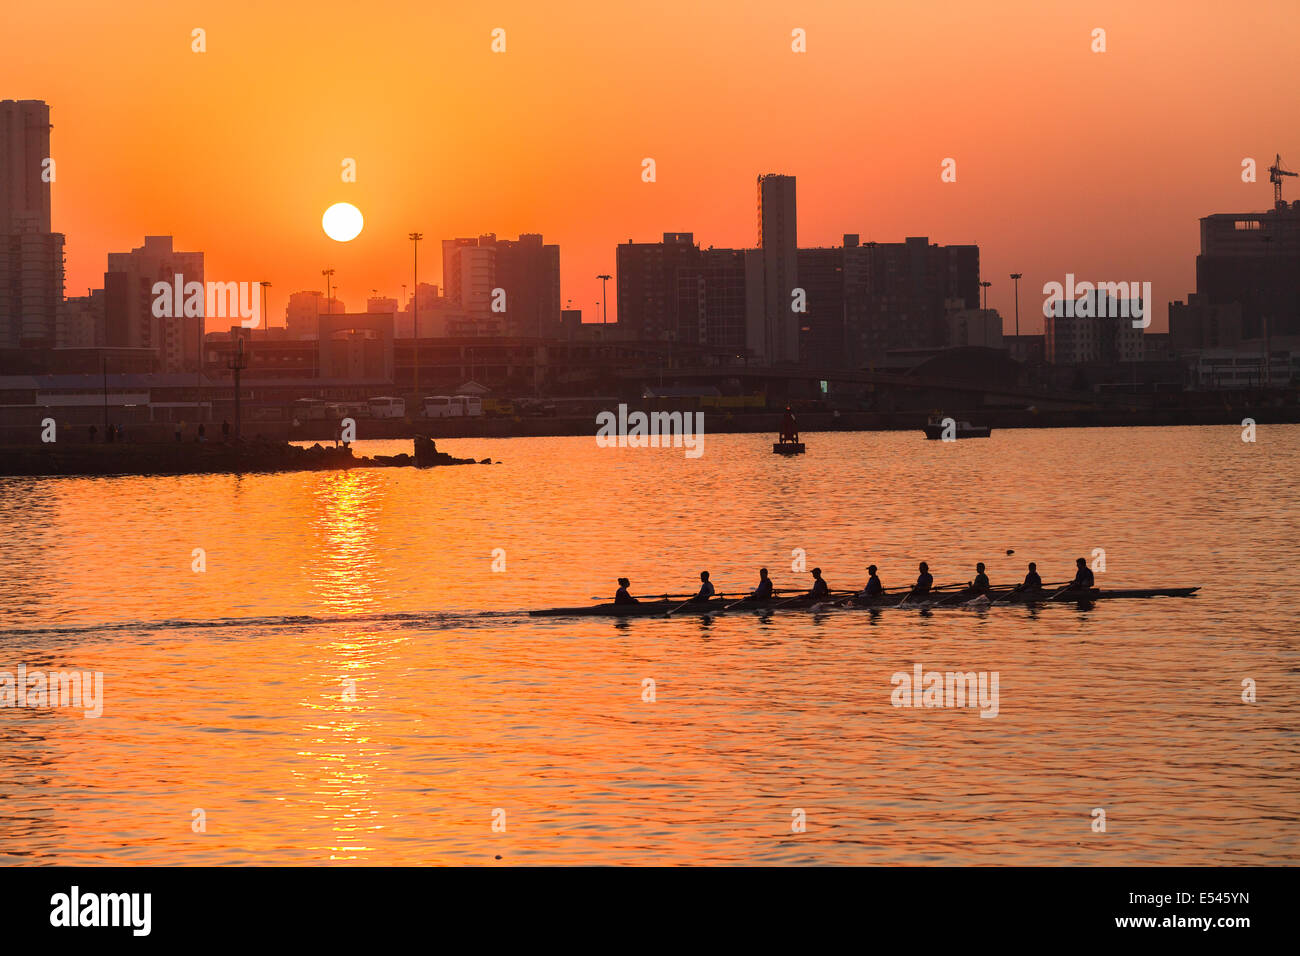 Regatta Rowing action athlete rowers on Durban harbor waters Stock Photo